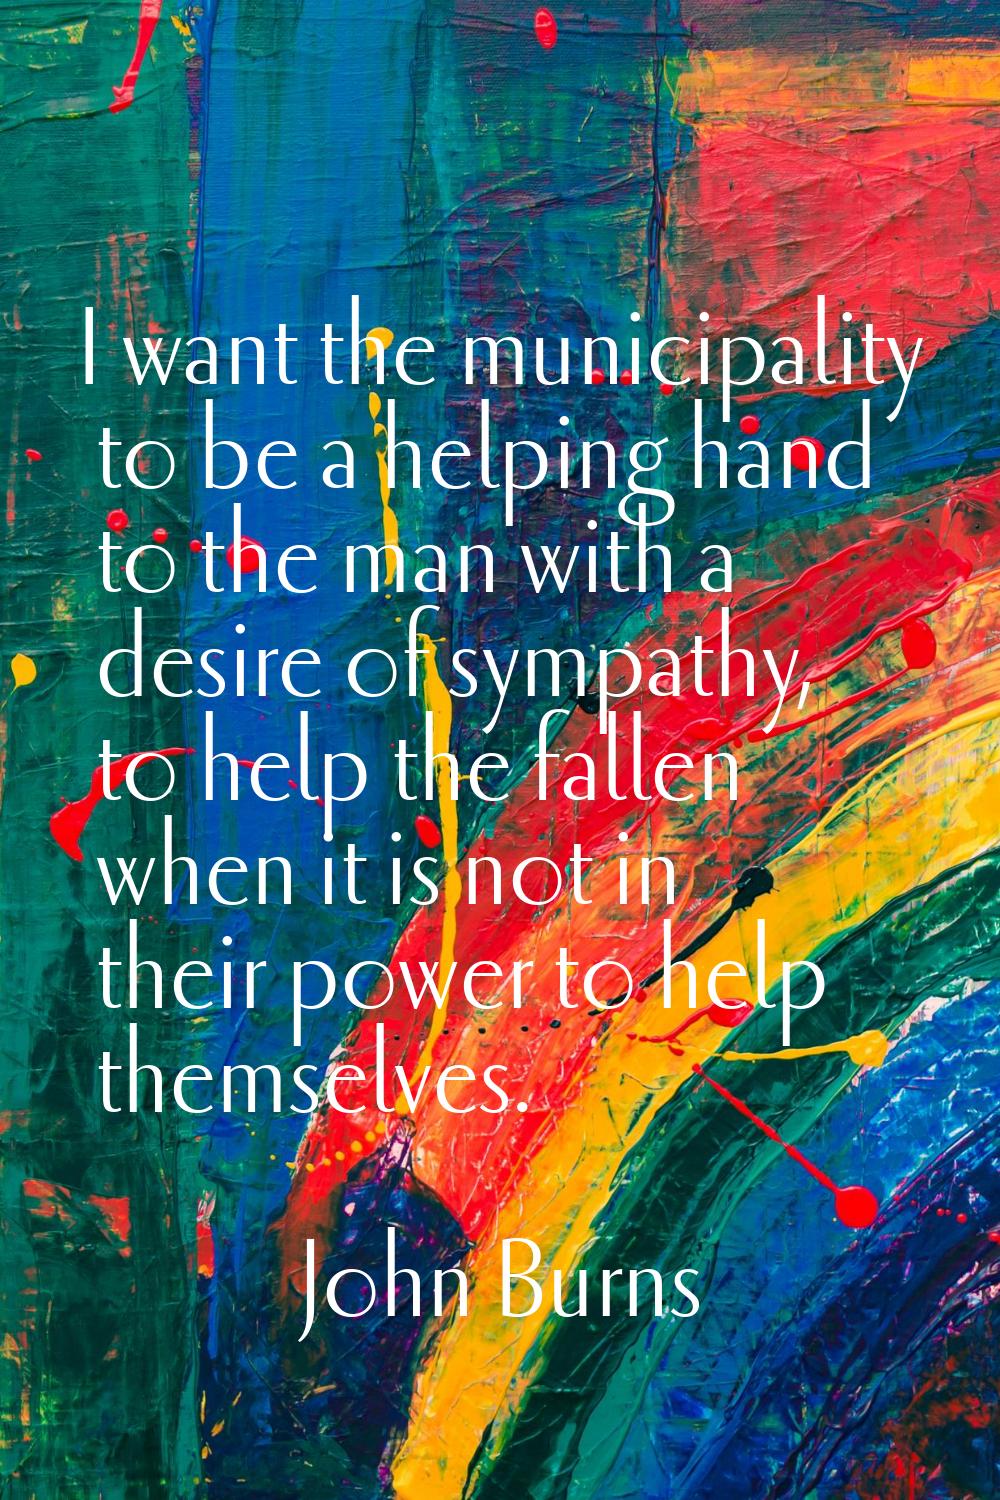 I want the municipality to be a helping hand to the man with a desire of sympathy, to help the fall